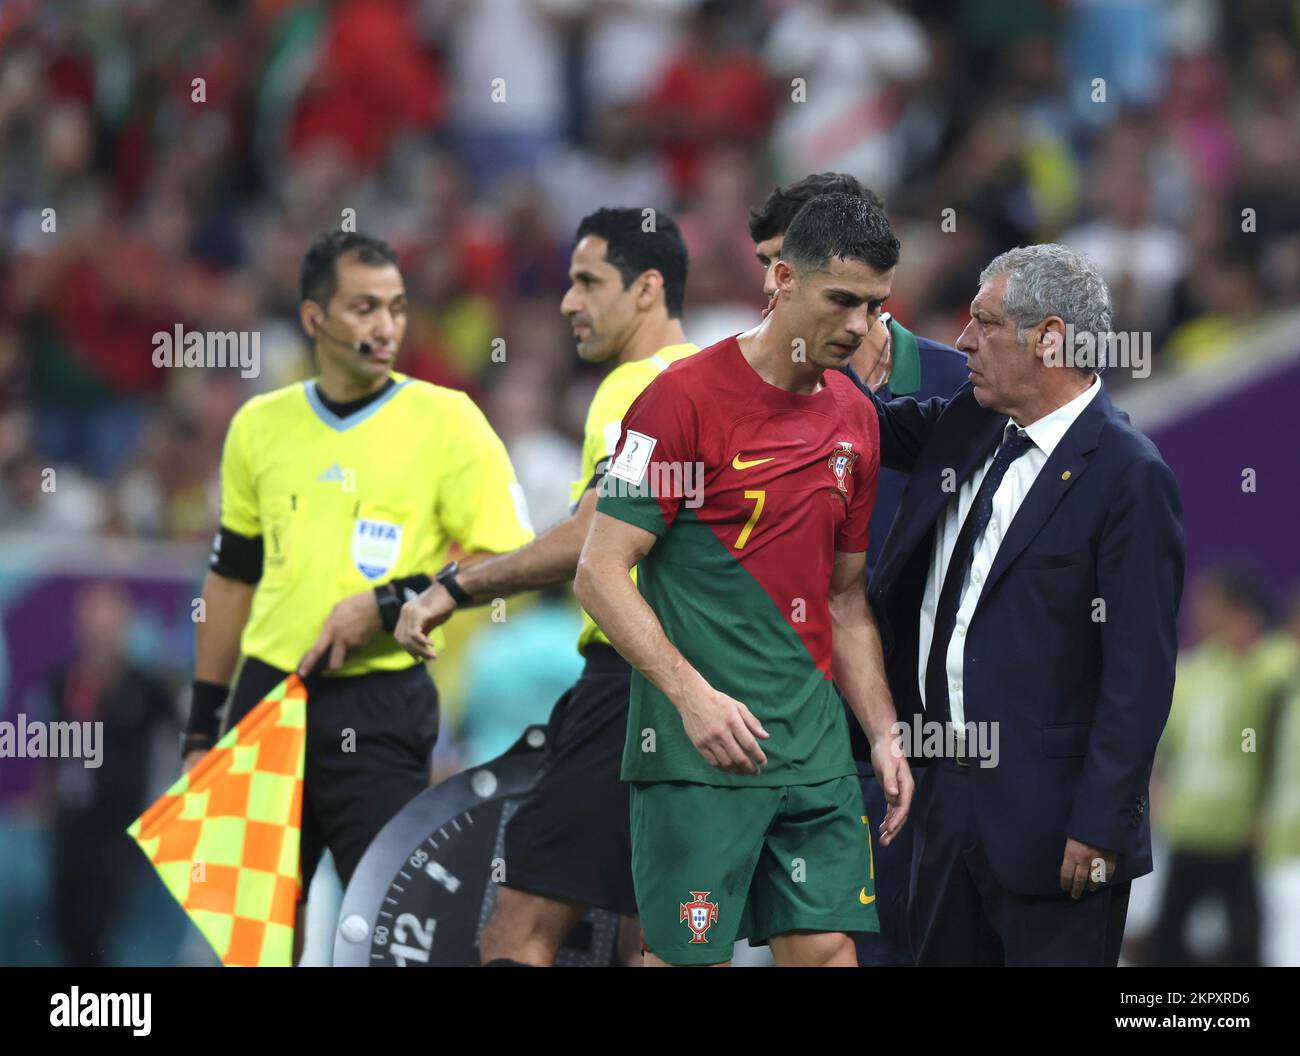 Lusail, Qatar. 28th Nov, 2022. Cristiano Ronaldo (L, front) of Portugal reacts with Fernando Santos (R, front), head coach of Portugal after being substituted during the Group H match between Portugal and Uruguay at the 2022 FIFA World Cup at Lusail Stadium in Lusail, Qatar, Nov. 28, 2022. Credit: Cao Can/Xinhua/Alamy Live News Stock Photo